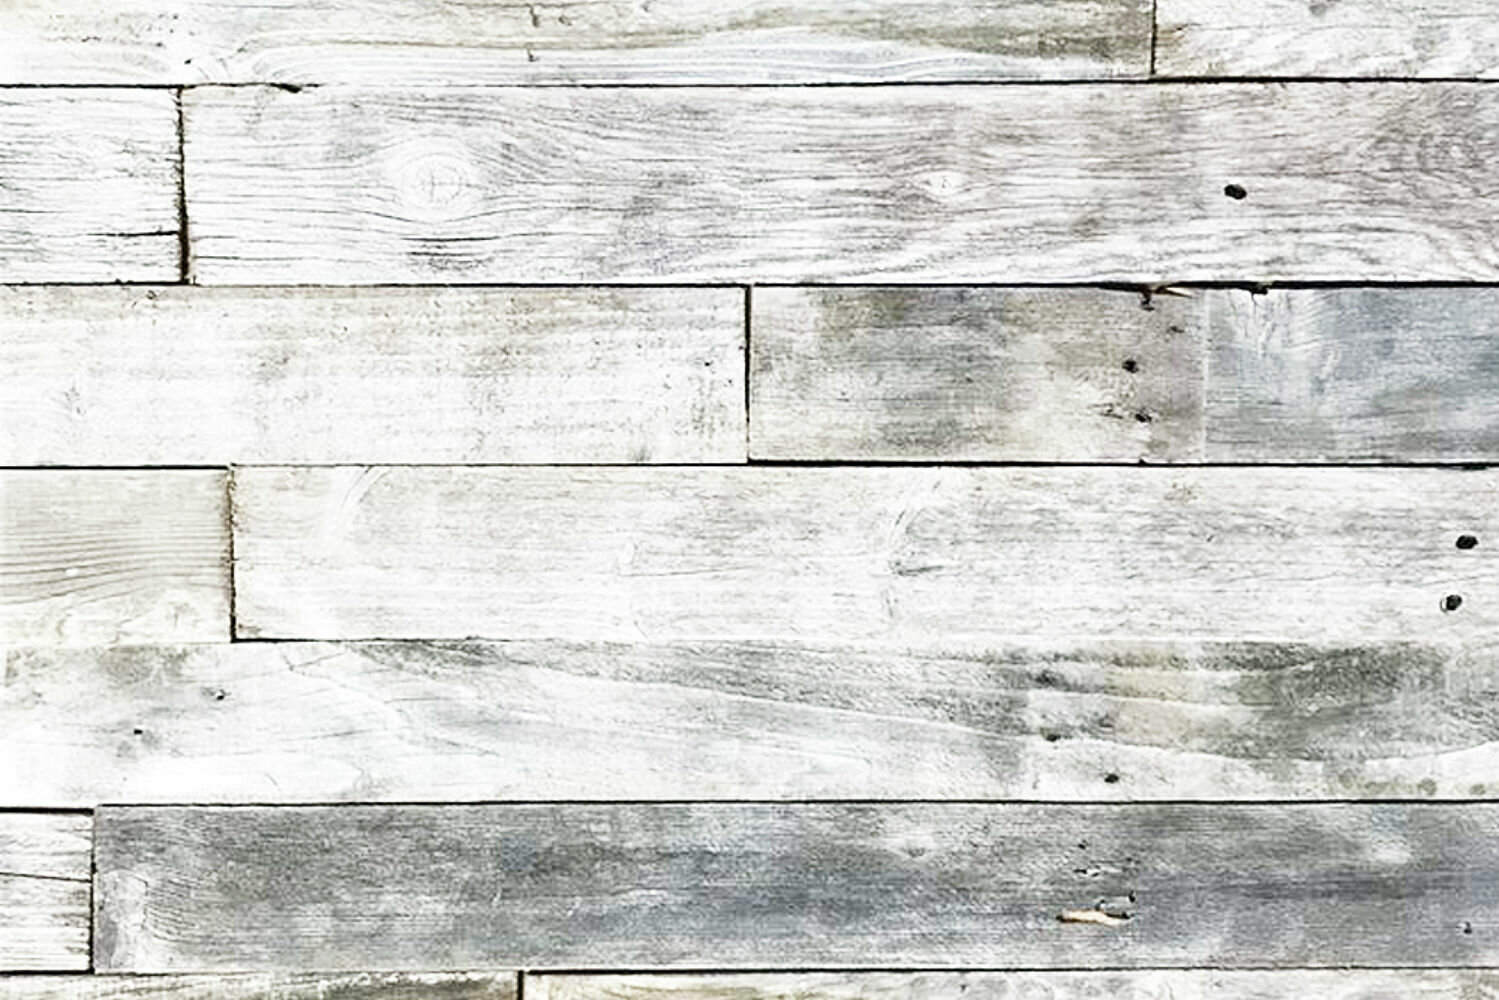 Reclaimed Barn Wood Wall Covering 3/8 x 48 - Eco-Building Products